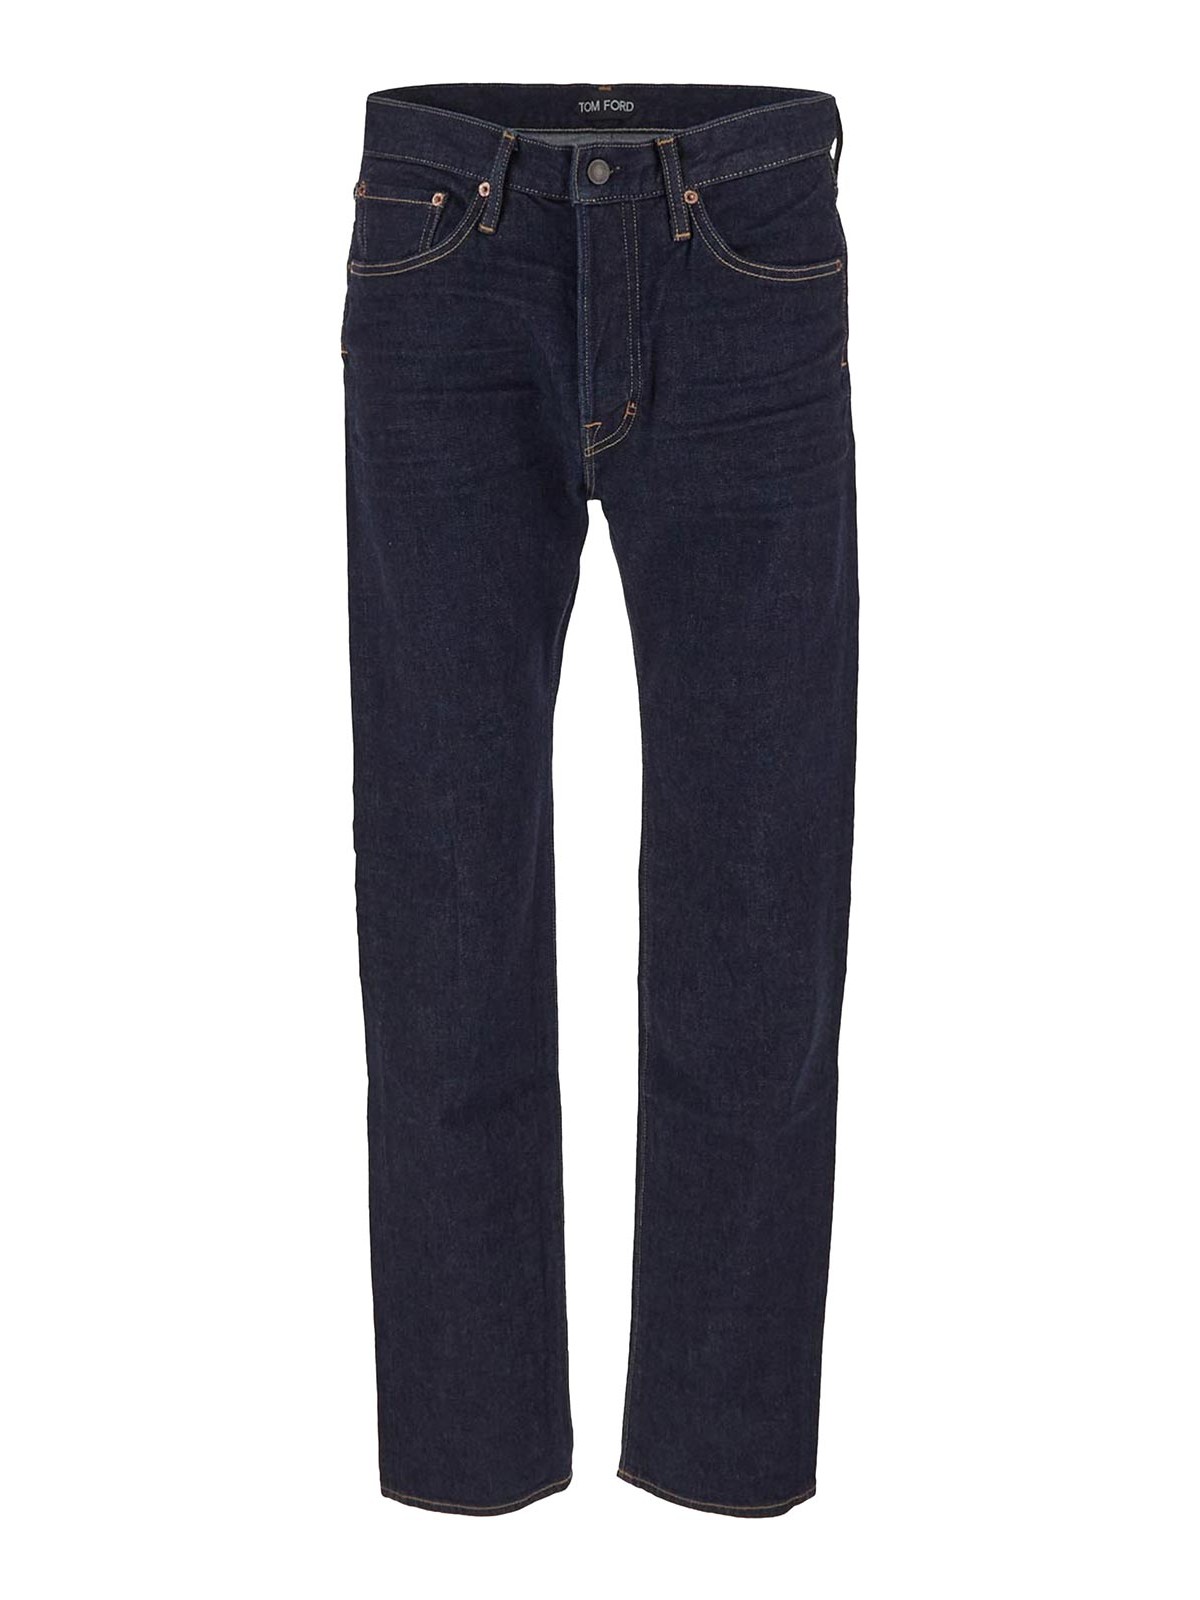 Tom Ford Blue Jeans With Side Pockets